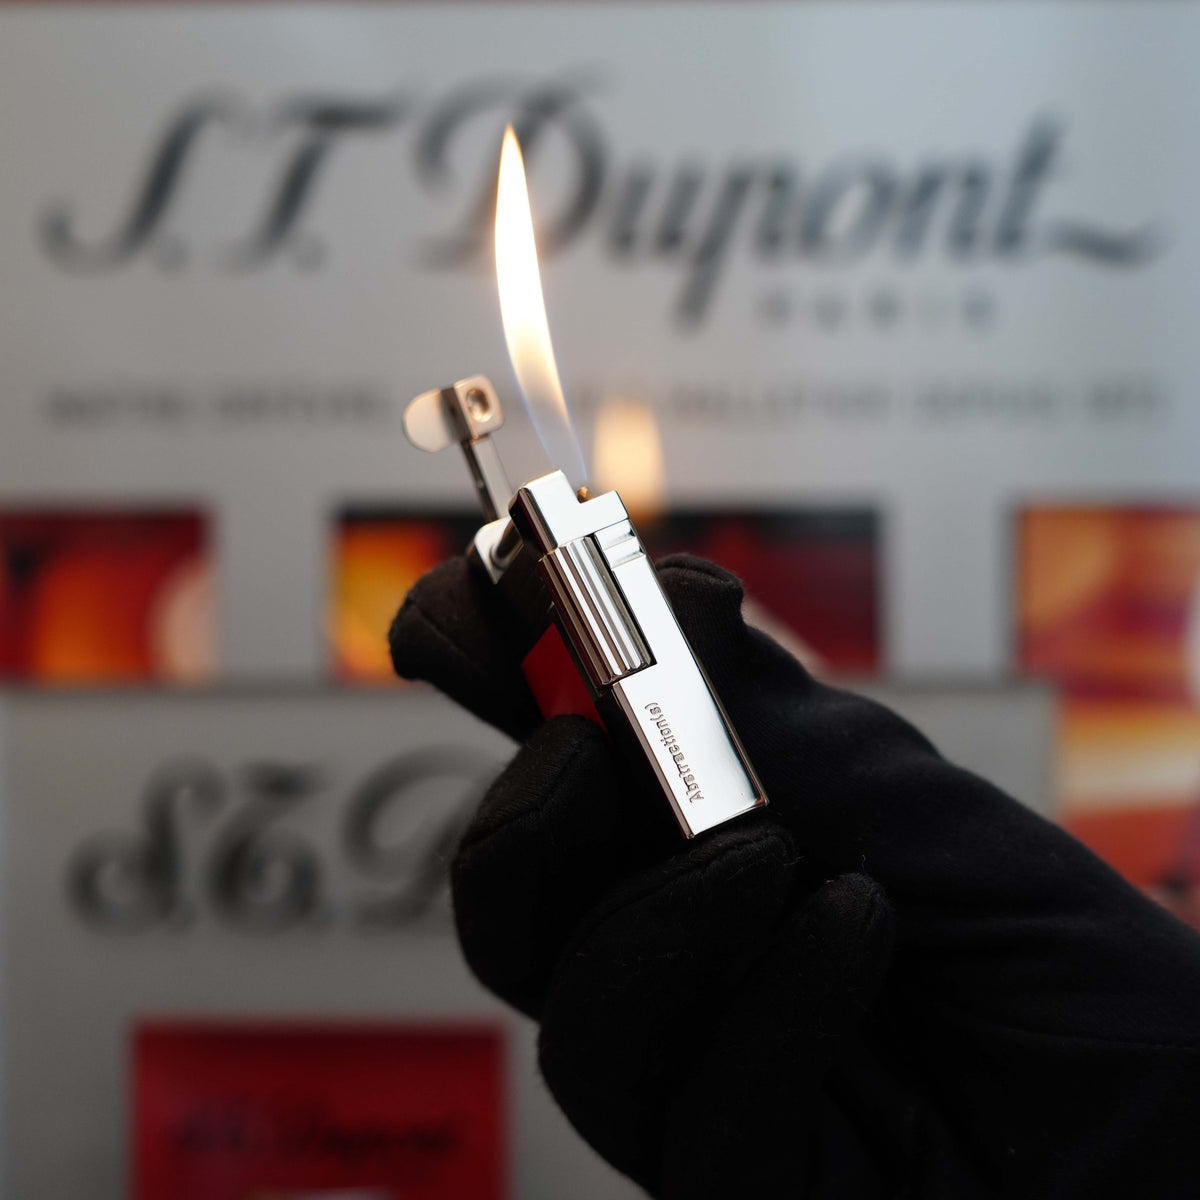 A person wearing a black glove holds a lit Vintage 1999 St Dupont Urban Limited Edition Platinum finish natural Red Lacquer lighter, its flame dancing against a blurred background featuring S.T. Dupont branding.